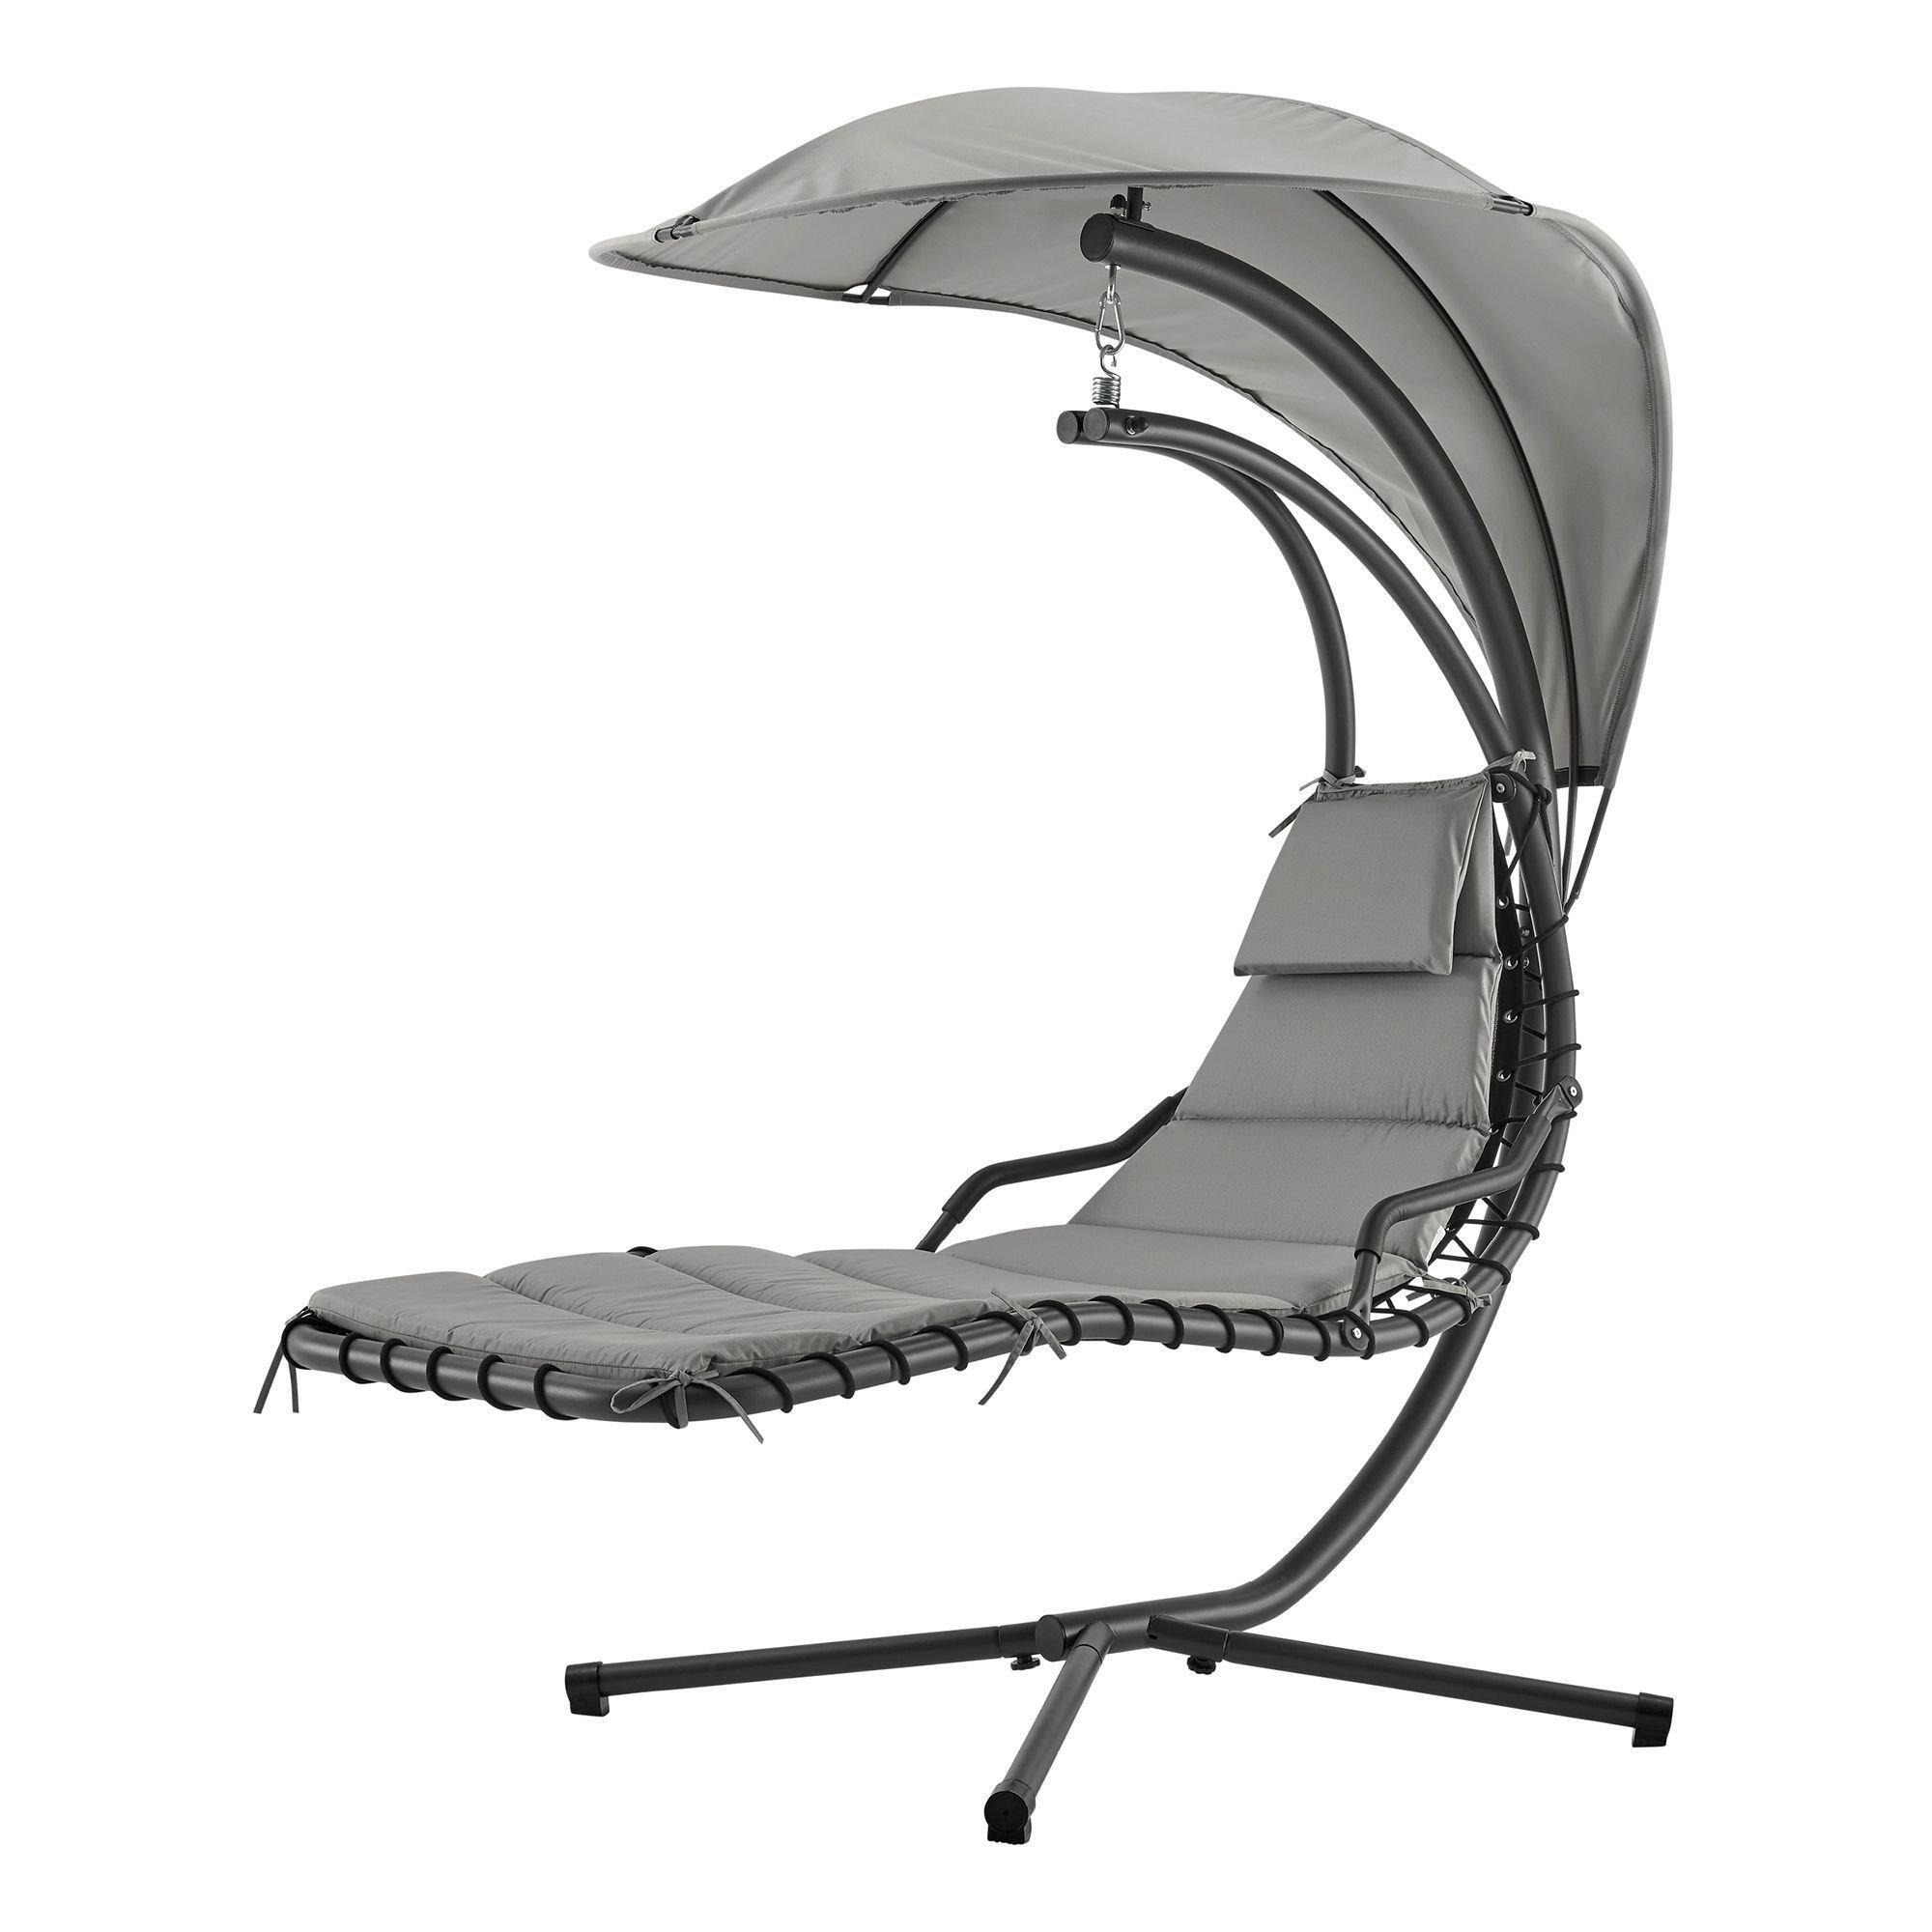 Bali Hanging Swing Lounger Chair With Canopy Hammock - image 1